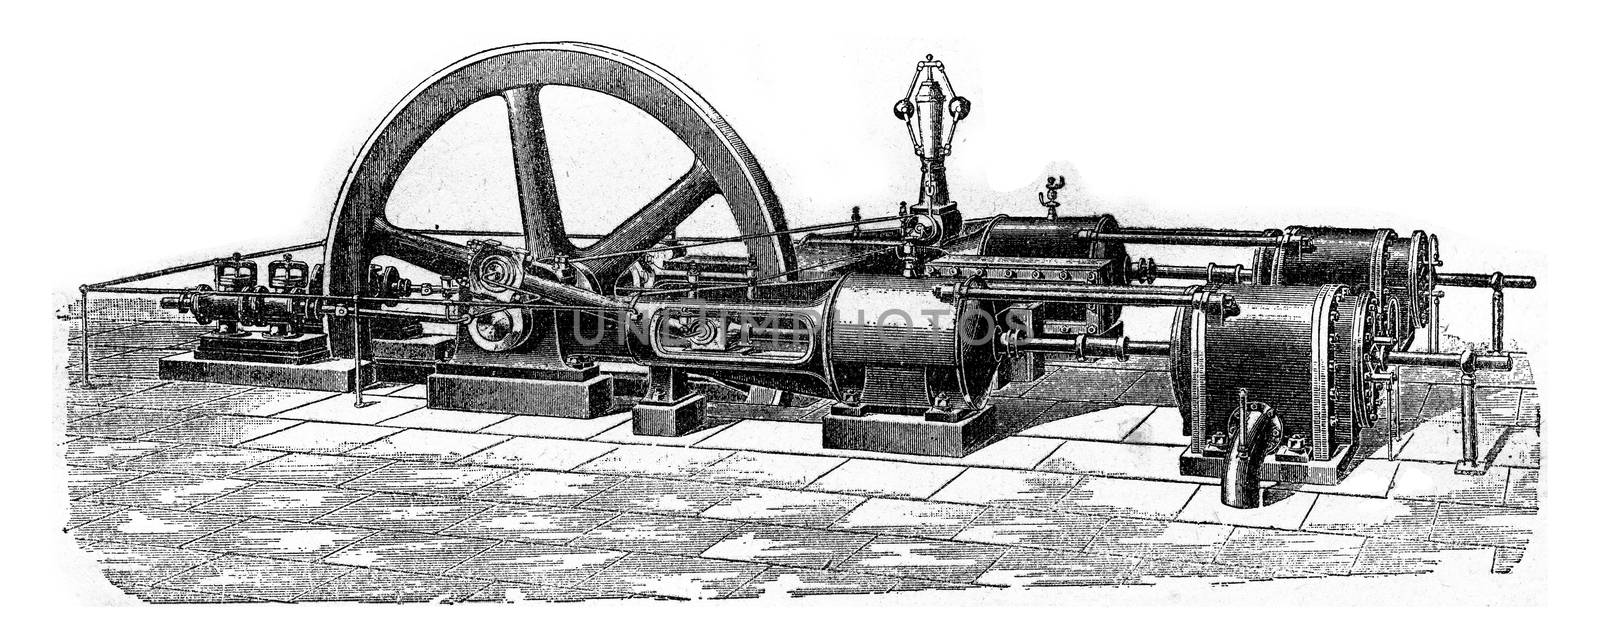 Apparatus of staged air compression and water injection, vintage engraved illustration. Industrial encyclopedia E.-O. Lami - 1875.
